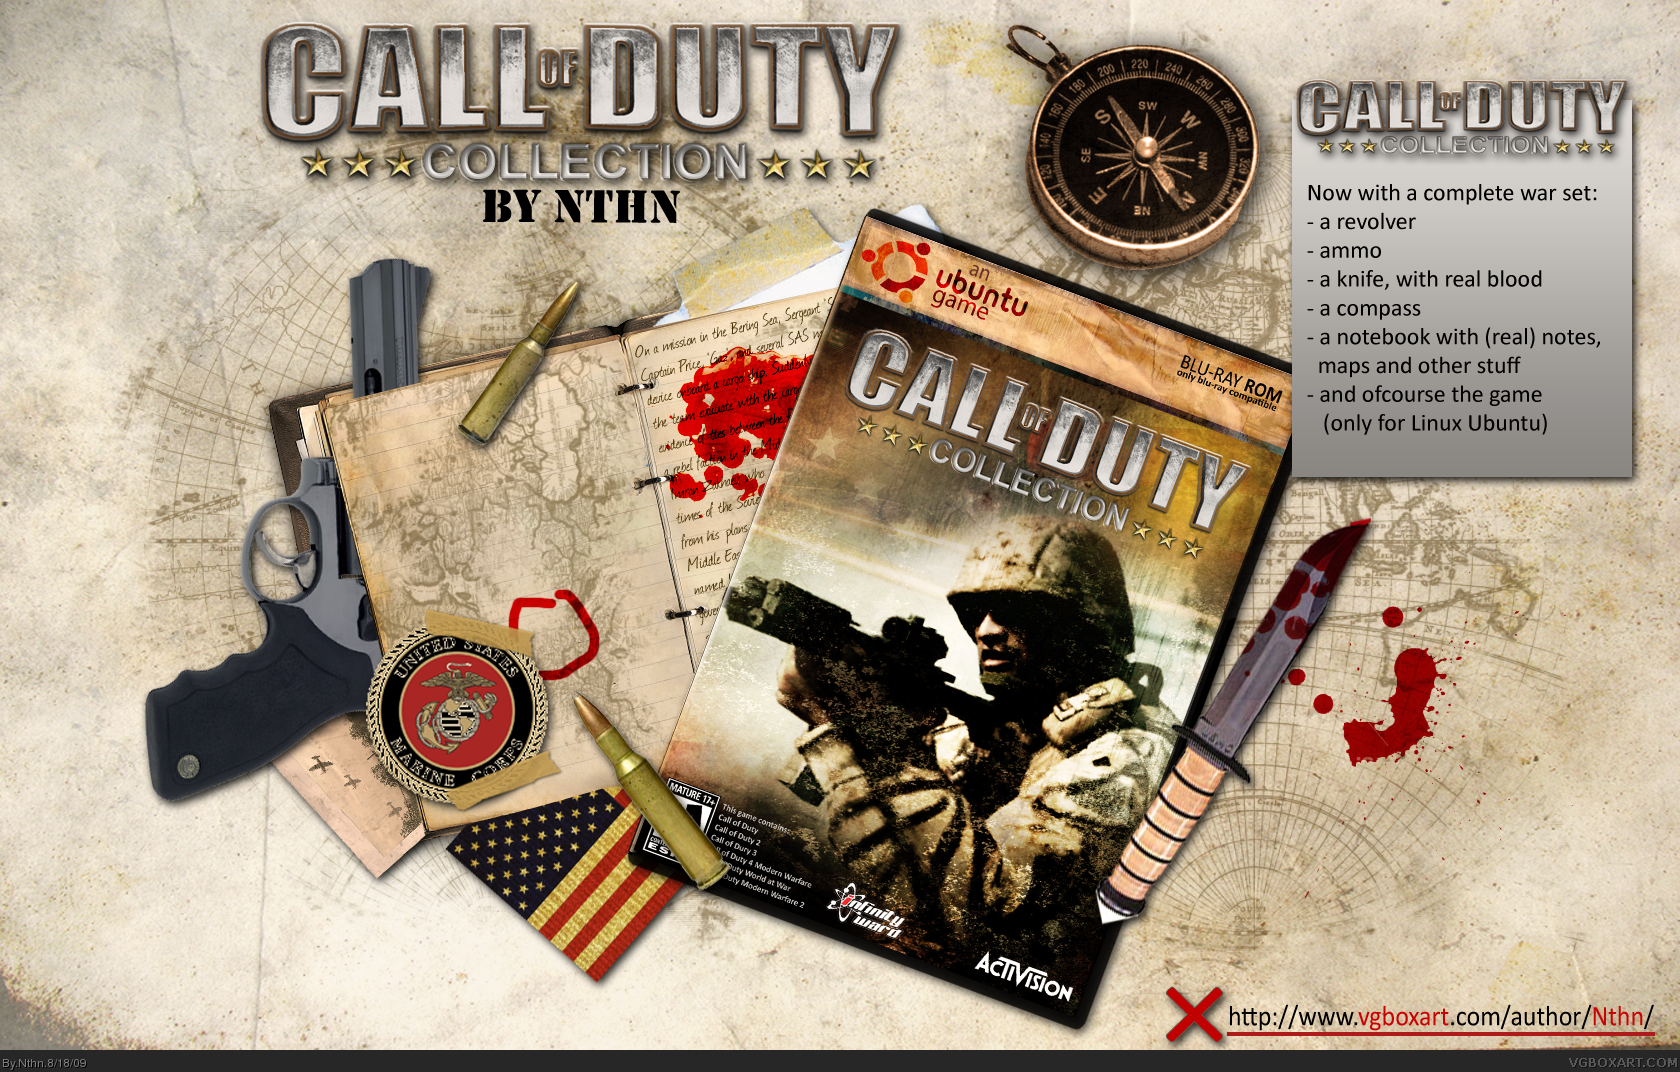 Call of Duty Collection box cover